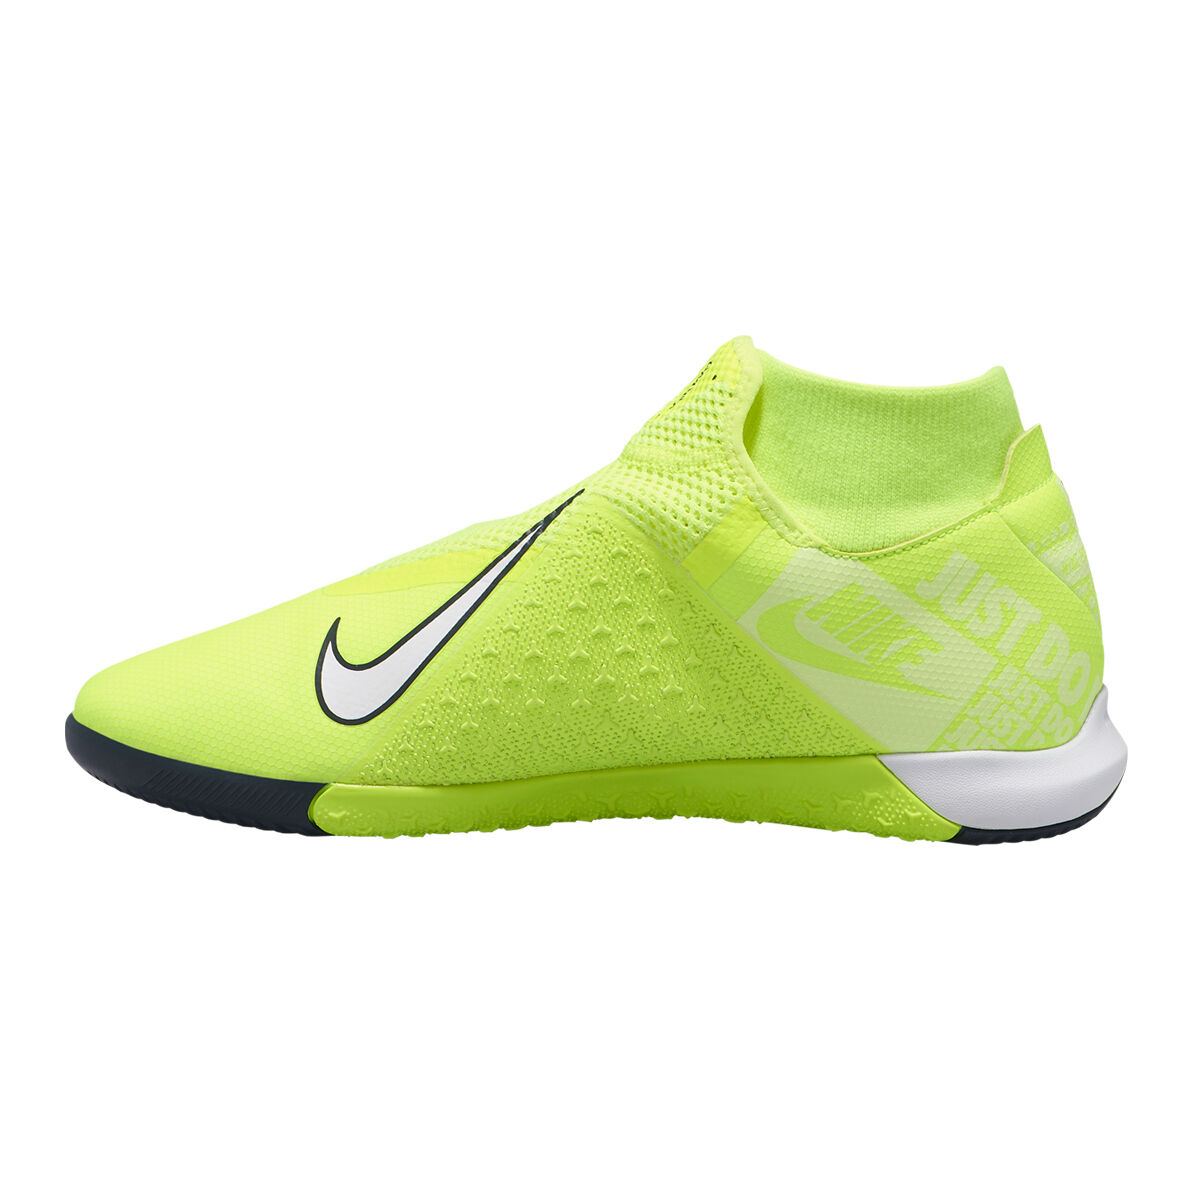 Buy New Nike Phantom Vision Soccer Cleats At The Best .